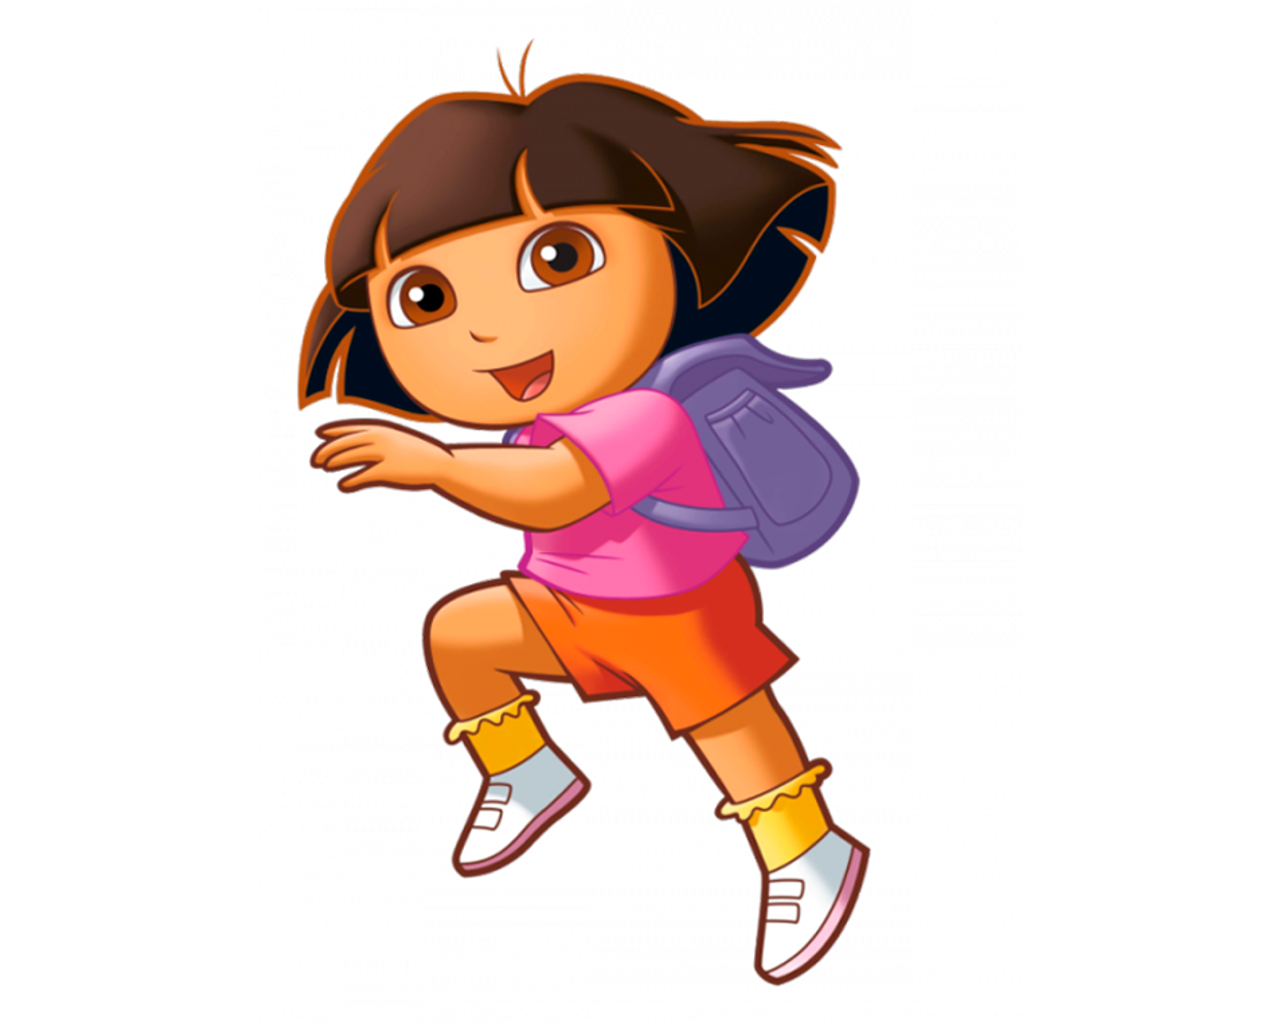 Download PNG image - Female Cartoon Character PNG Image 